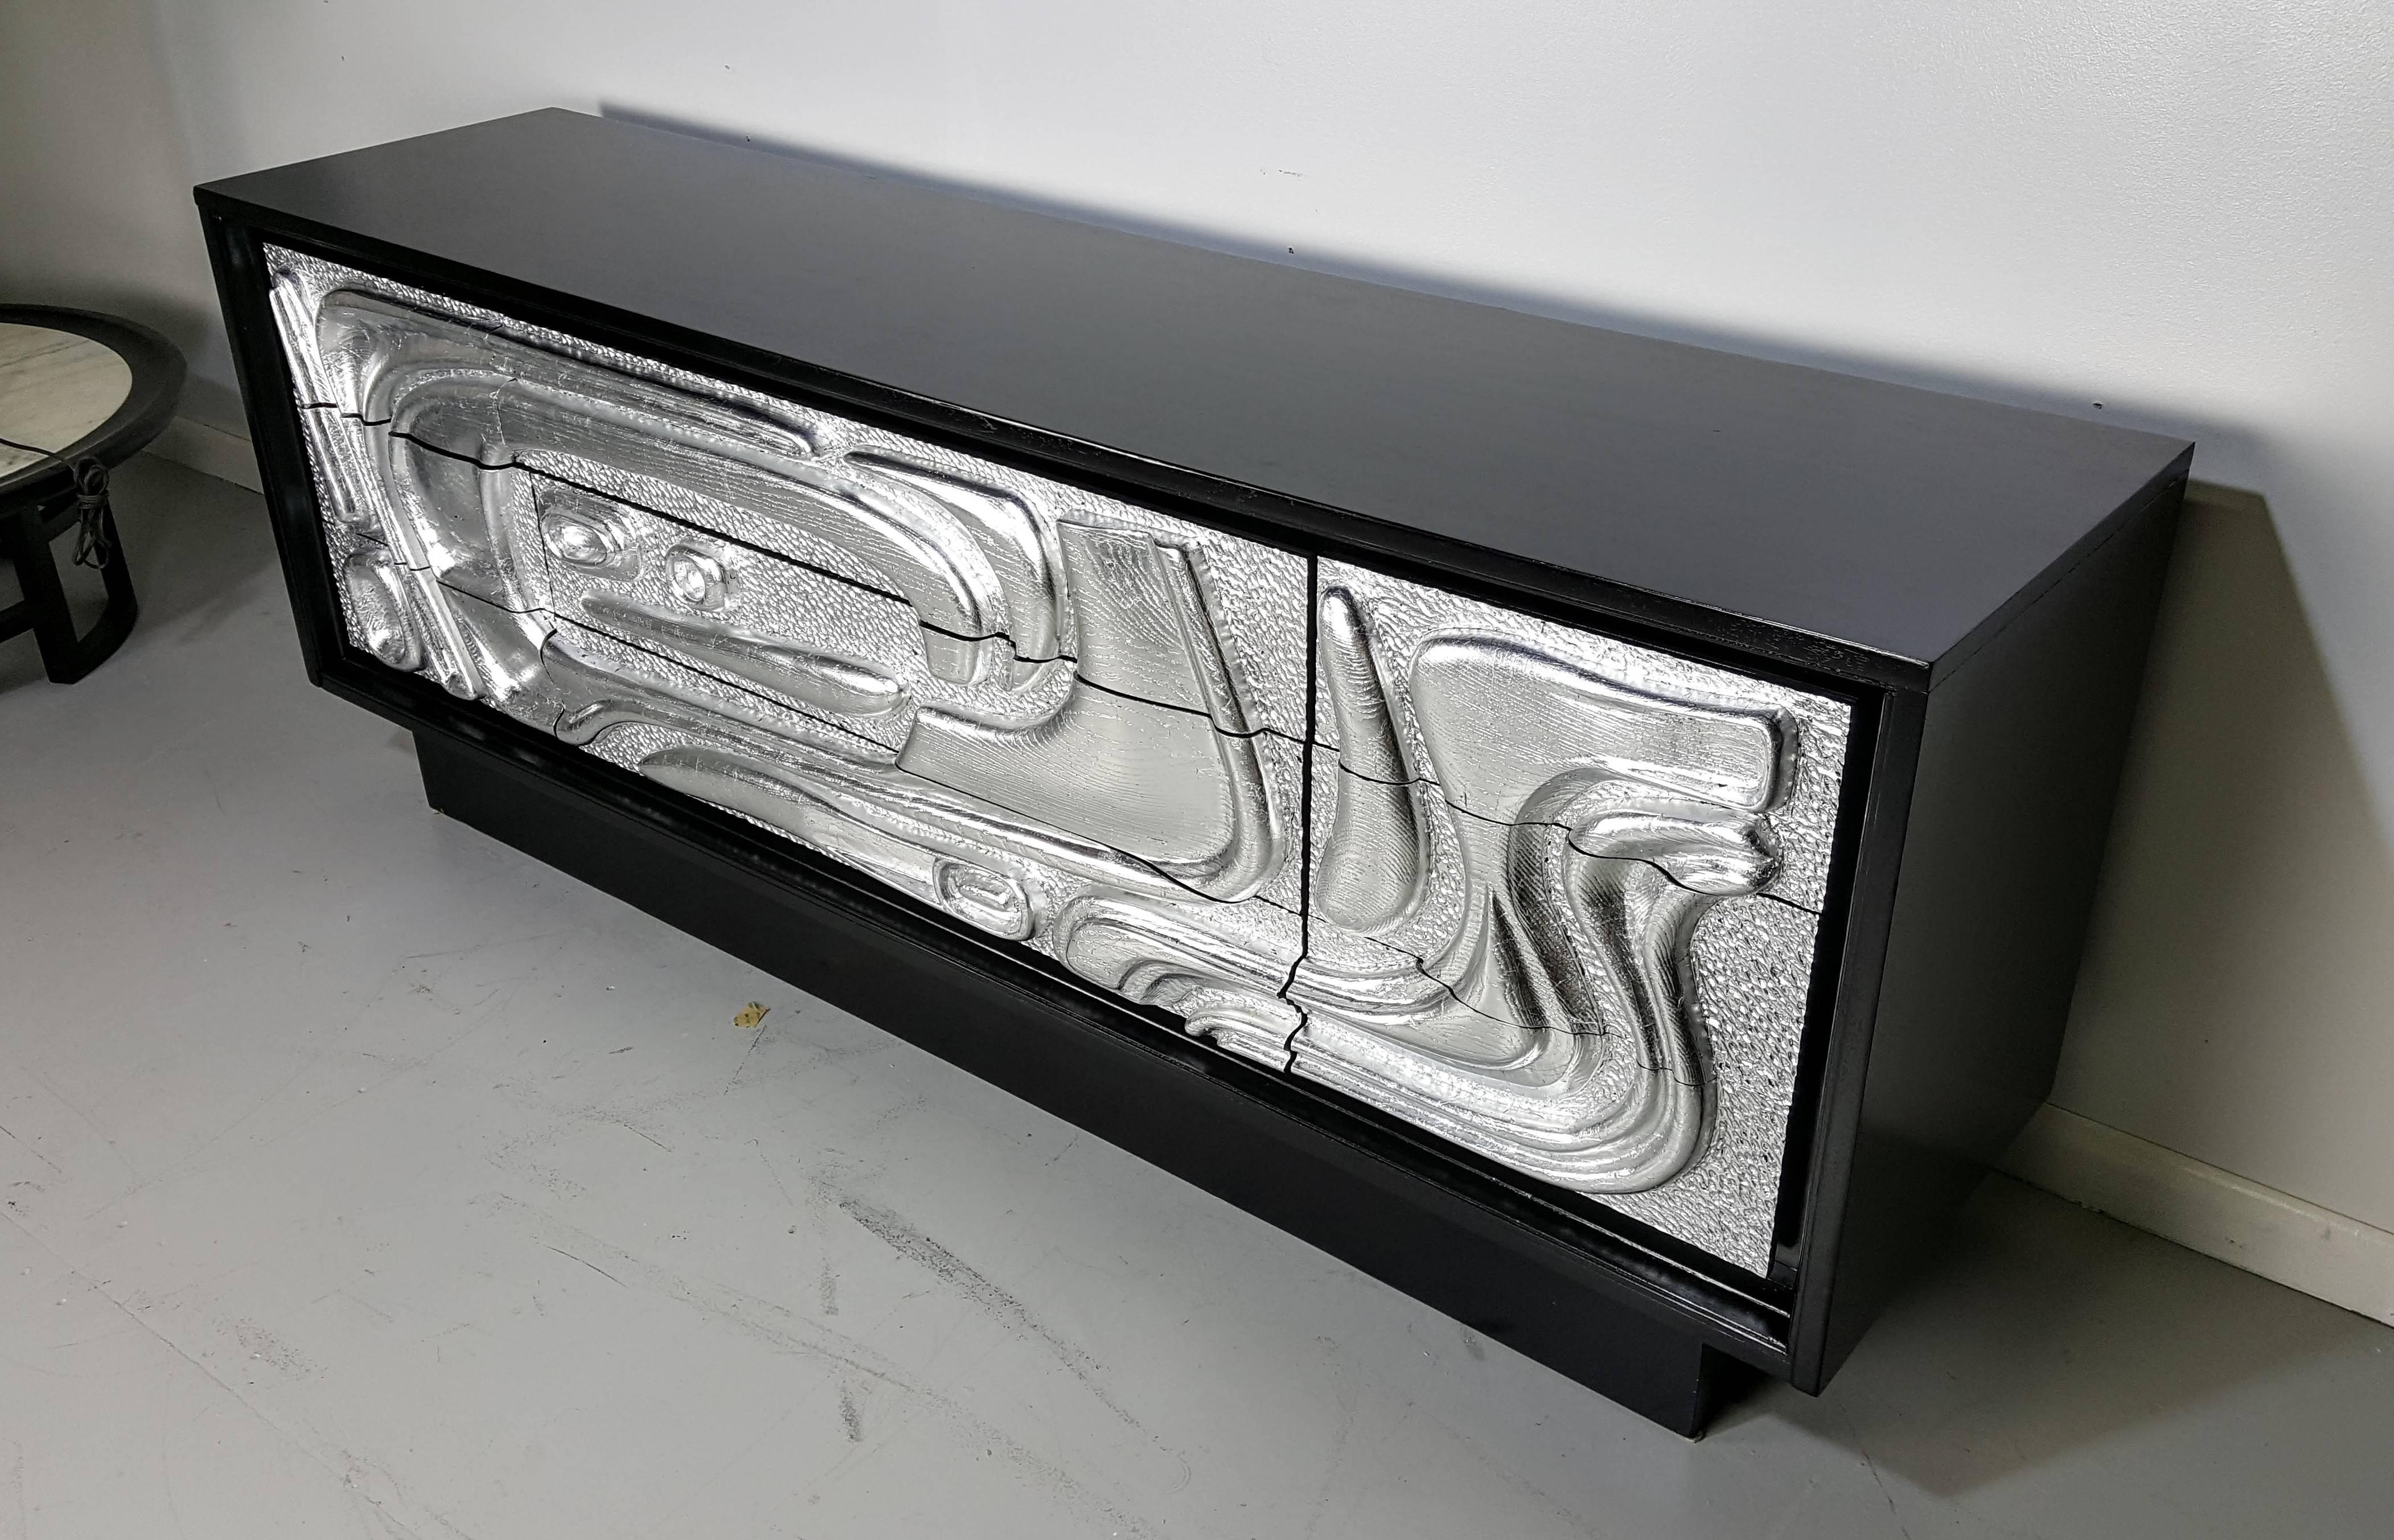 Sculptural silver leaf cabinet with Brutalist relief, ebonized case. Hand done gold leafing and lacquering. Fully restored and in excellent condition. Serves as a dresser, buffet, credenza, etc.

See this item in our private NYC showroom! Refine